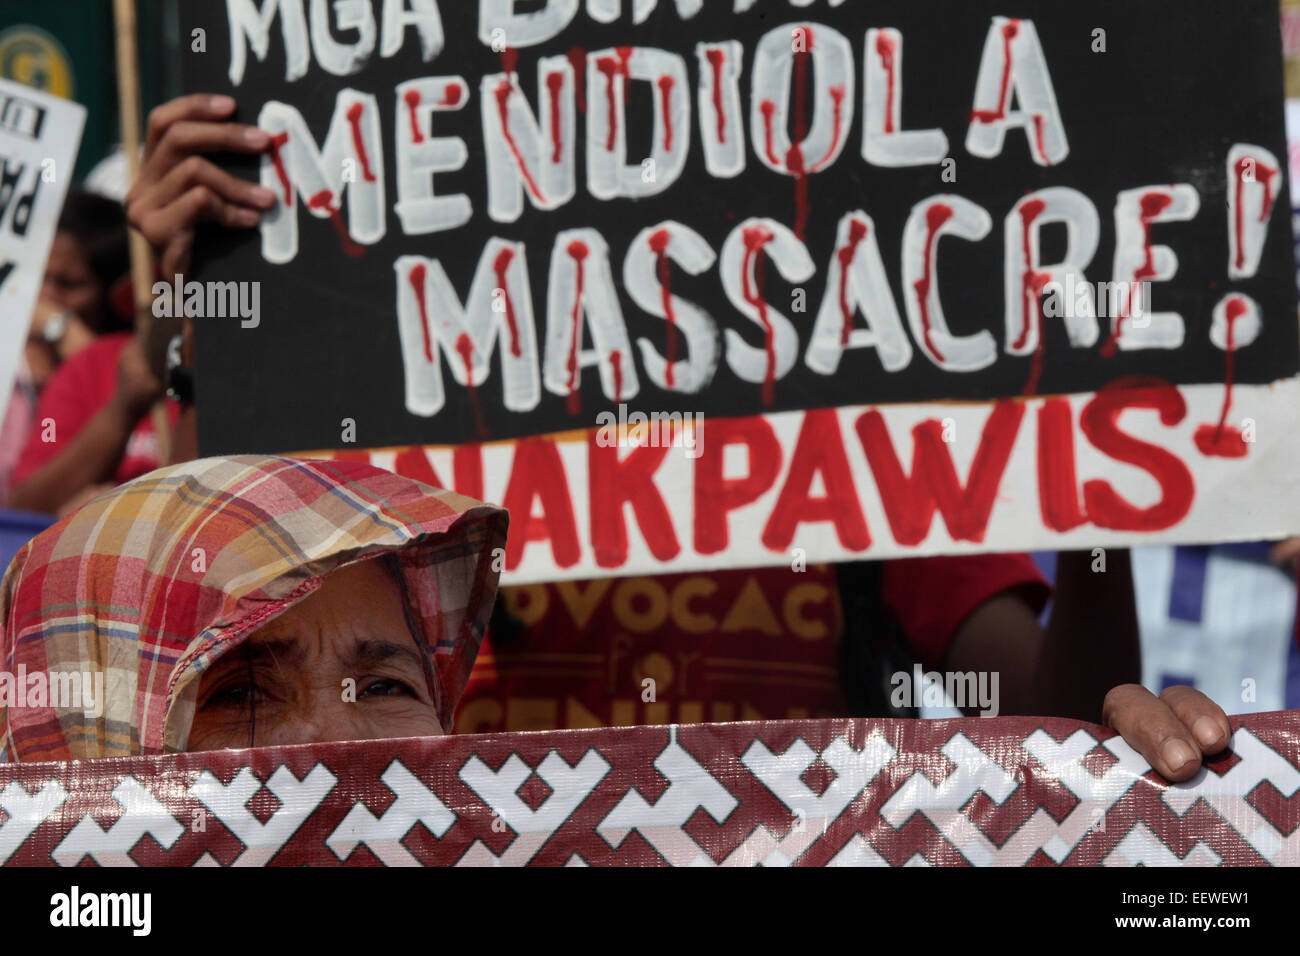 Manila, Philippines. 22nd Jan, 2015. Farmers hold placards during a protest rally commemorating the Mendiola Massacre anniversary near the Malacanan Palace in Manila, the Philippines, Jan. 22, 2015. The farmers called for land reform and demanded justice for the 13 farmers who were killed 28 years ago. © Rouelle Umali/Xinhua/Alamy Live News Stock Photo